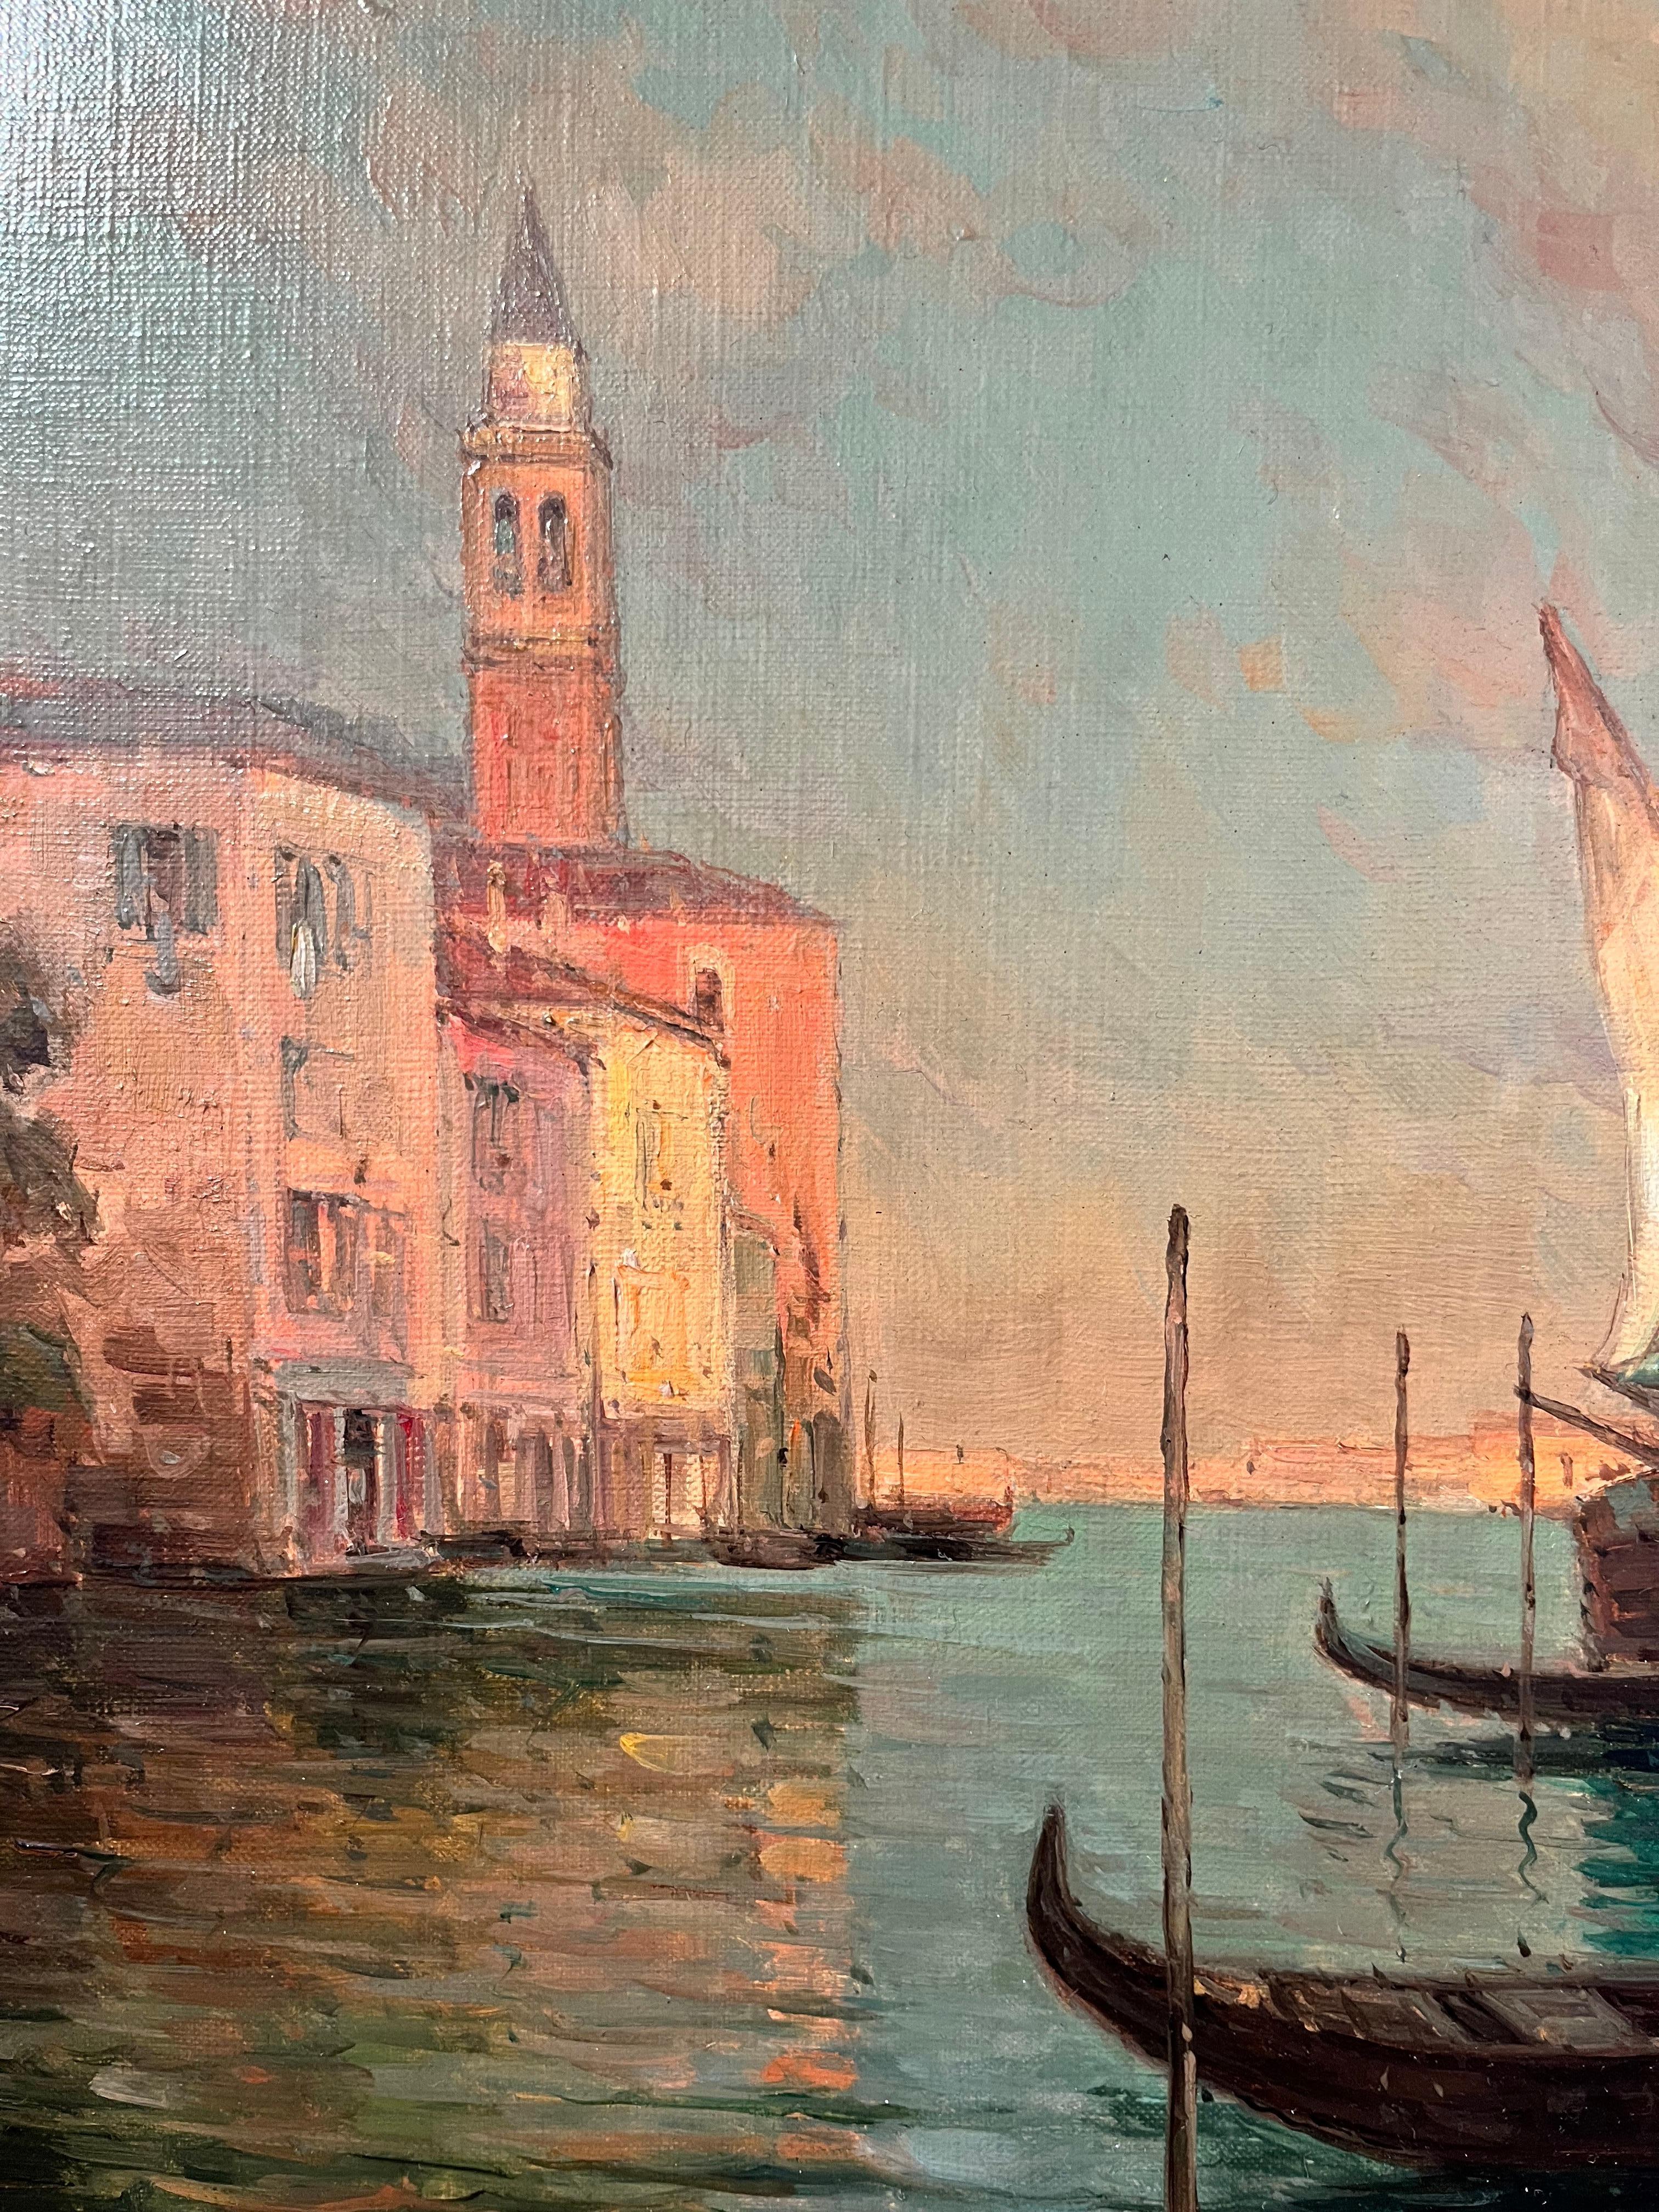 'Sunrise in Venice' 20th Century Venetian Landscape painting of buildings, figures with boats. The warm sun rising creates a beautiful atmospheric work. Noel Bouvard had a brilliant eye for detail, much like his father Antoine Bouvard Snr.